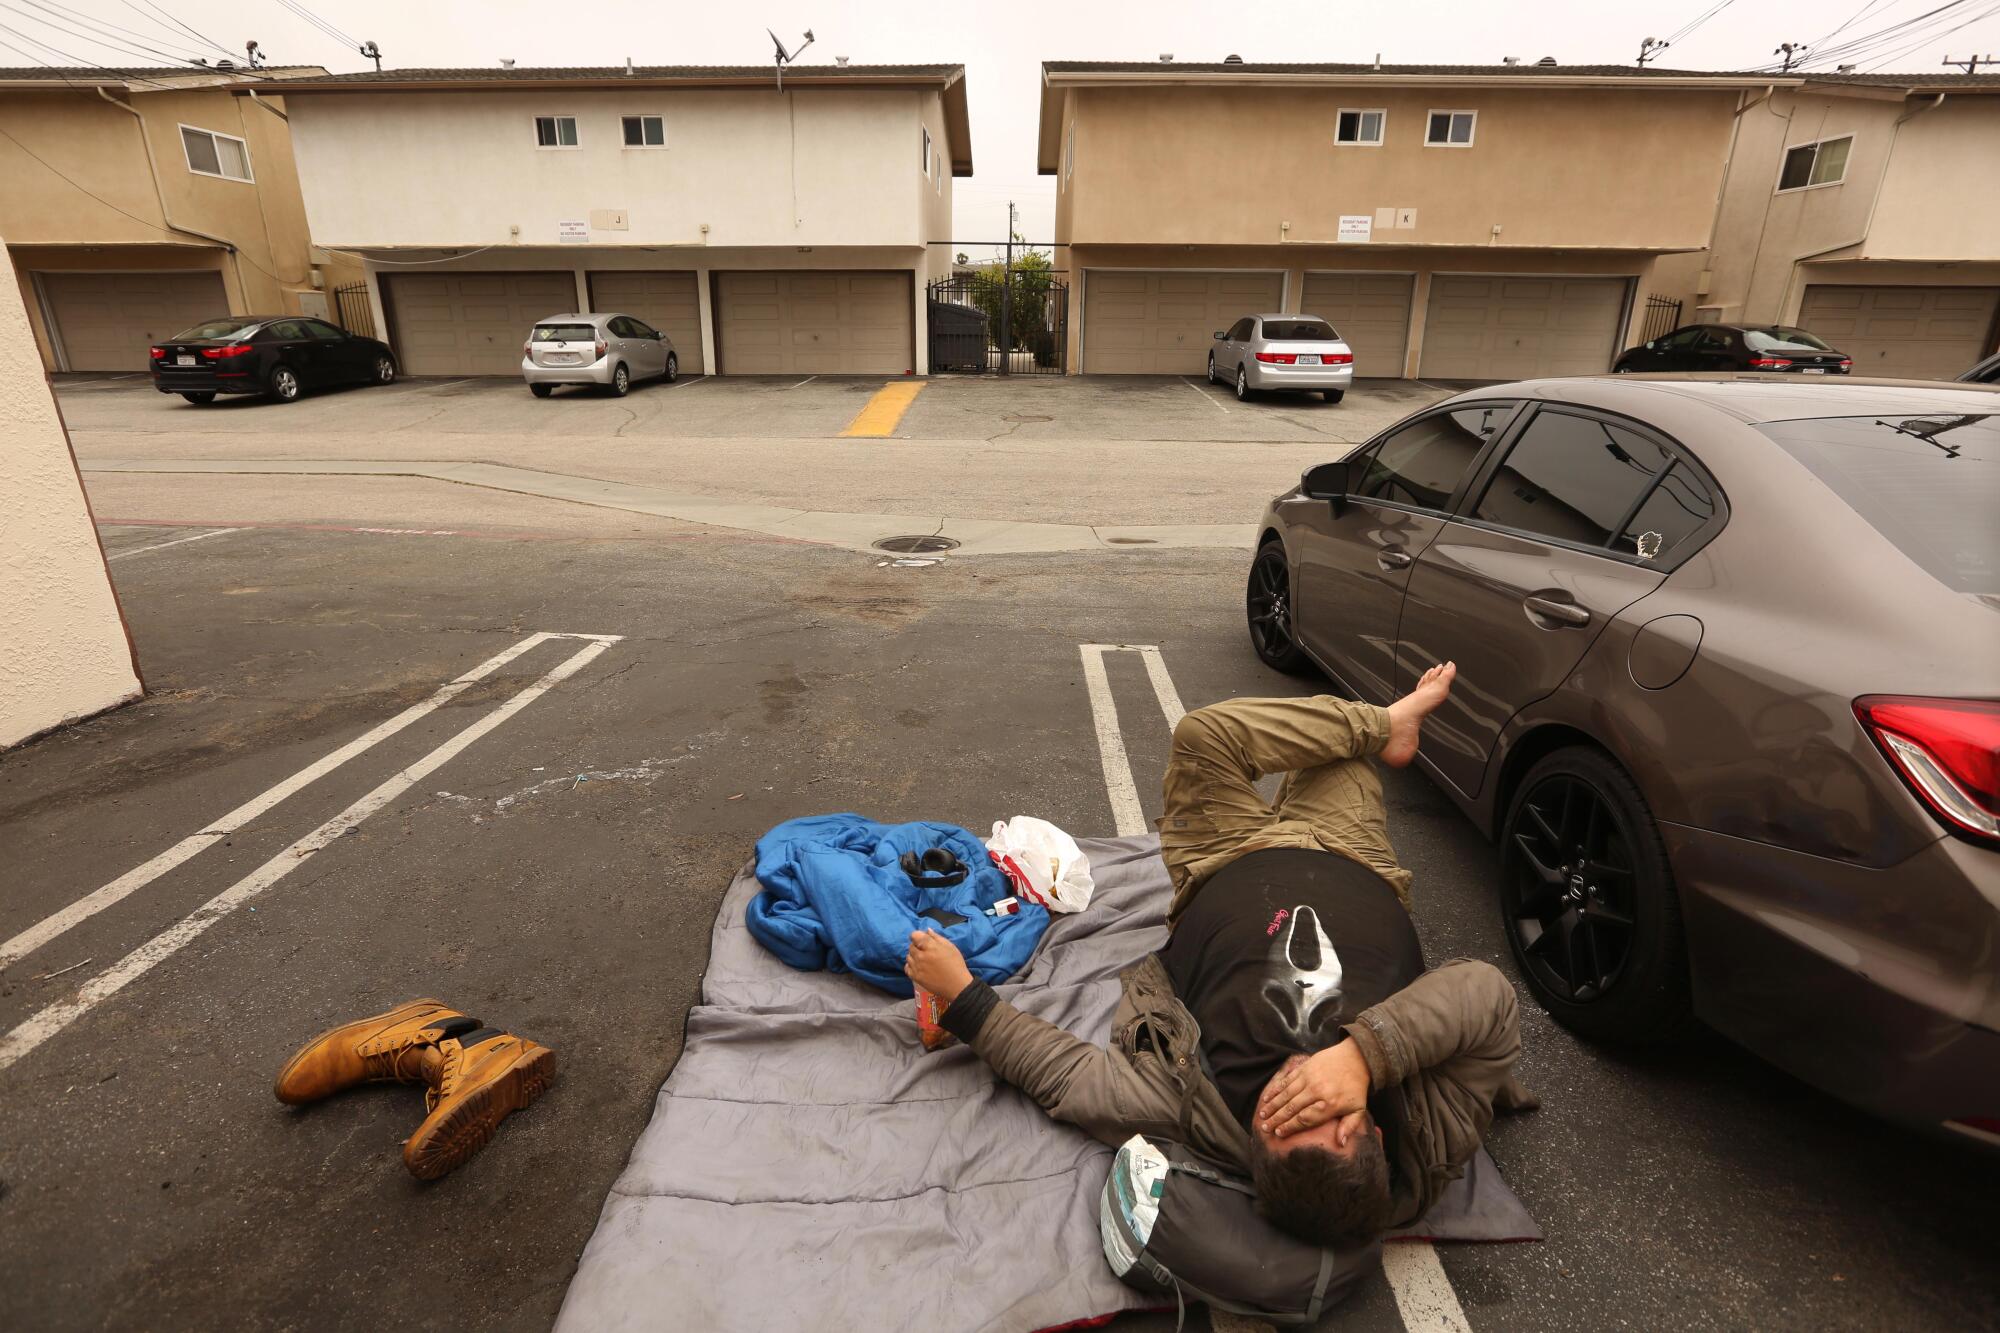 Where Can I Sleep in My Car If I'm Homeless: Safe Havens Revealed